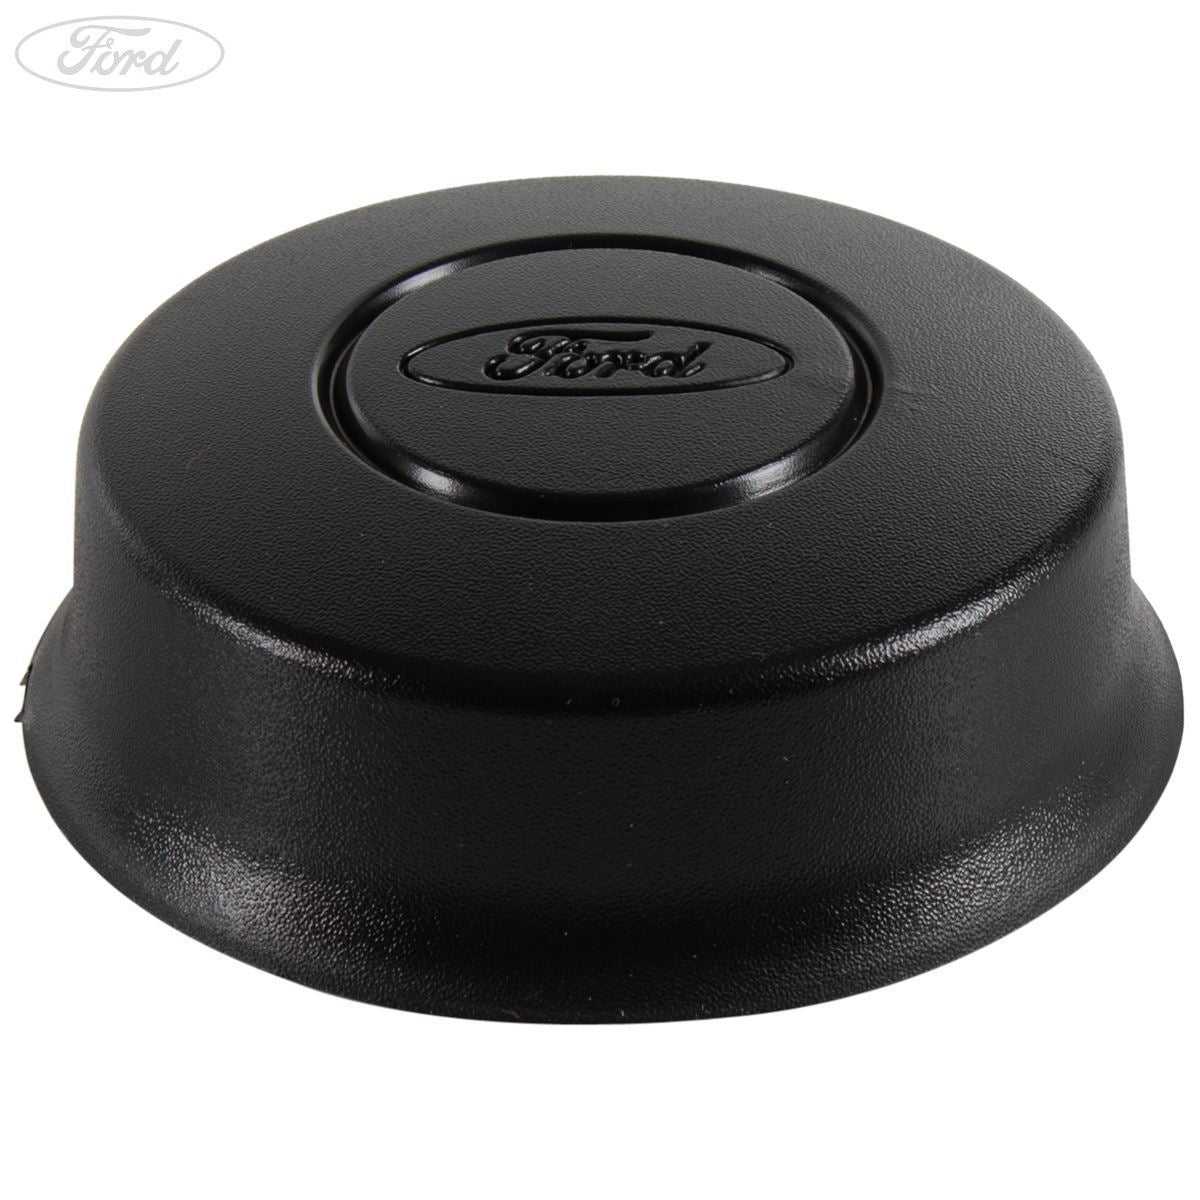 Ford, TRANSIT CONNECT MK1 WHEEL CENTRE CAP FOR 15" ALLOY